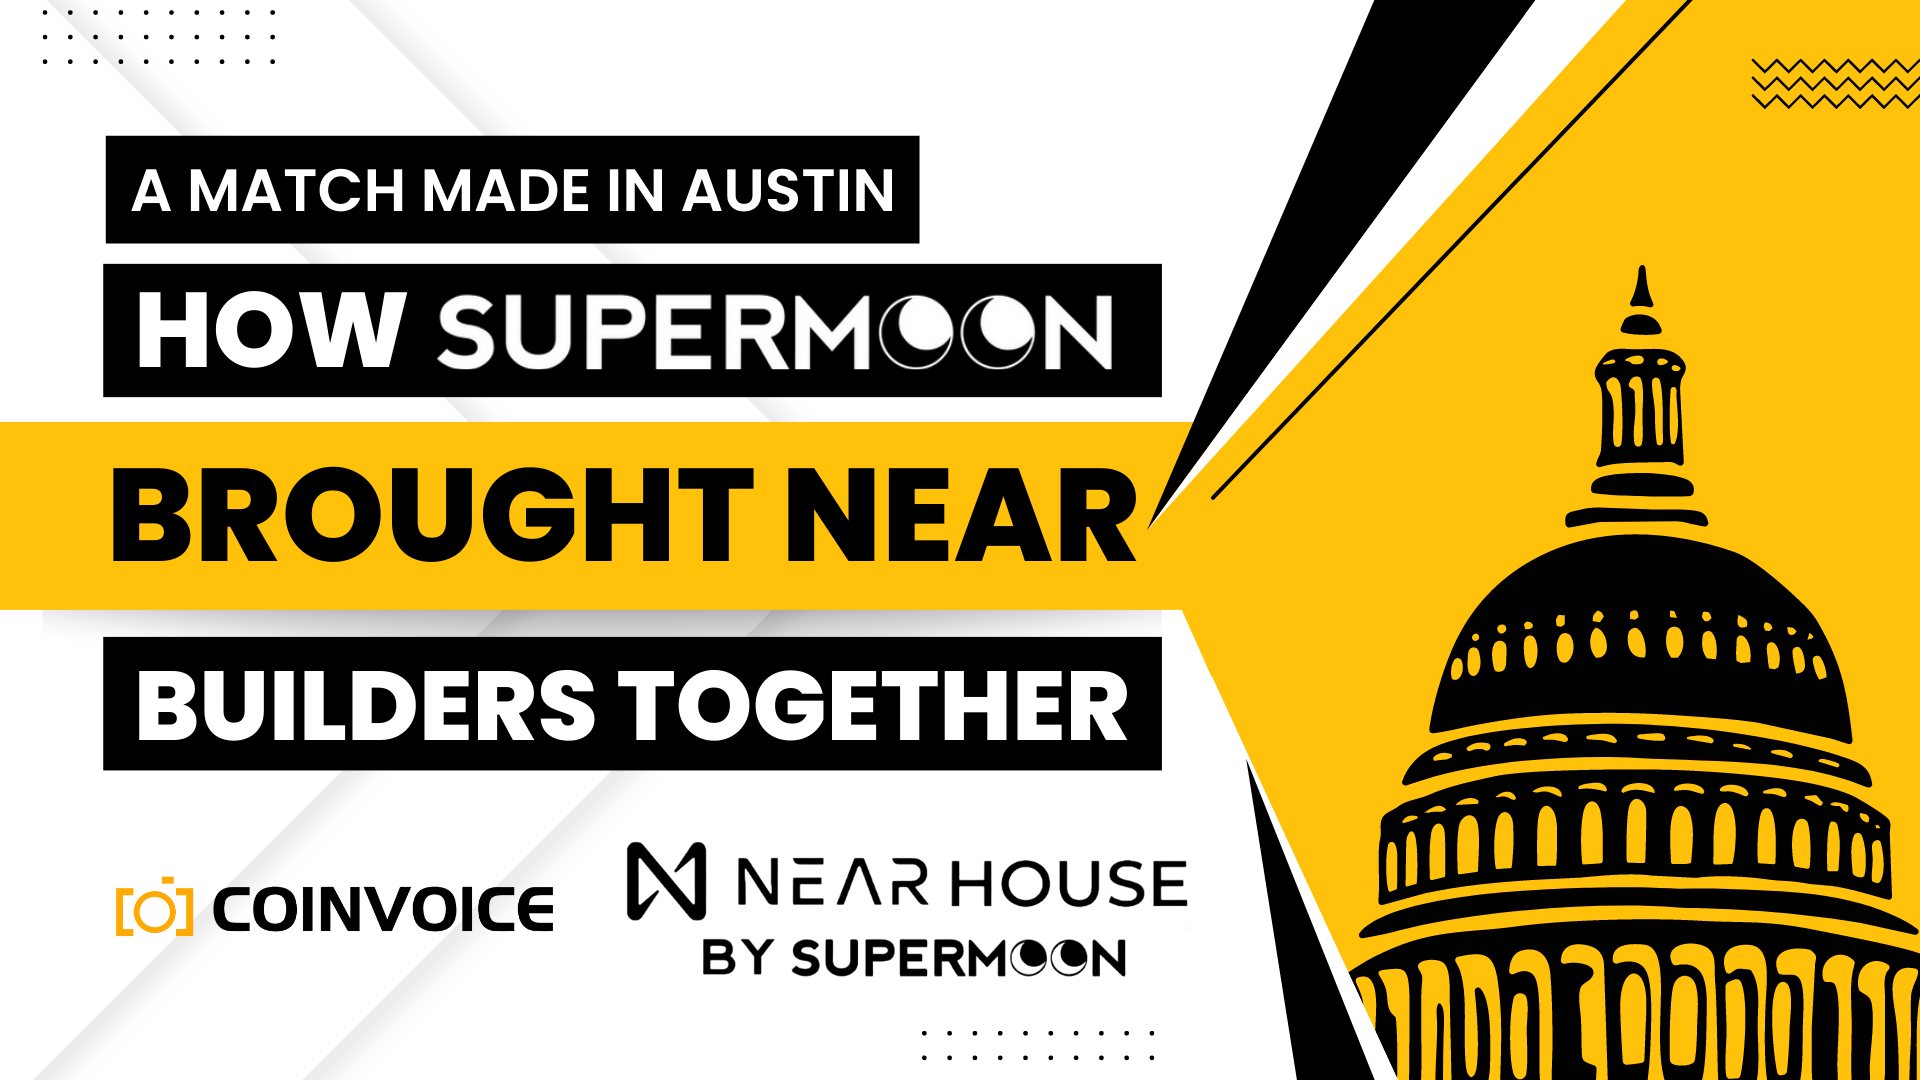 A Match Made in Austin: How Supermoon Brought NEAR Builders Together